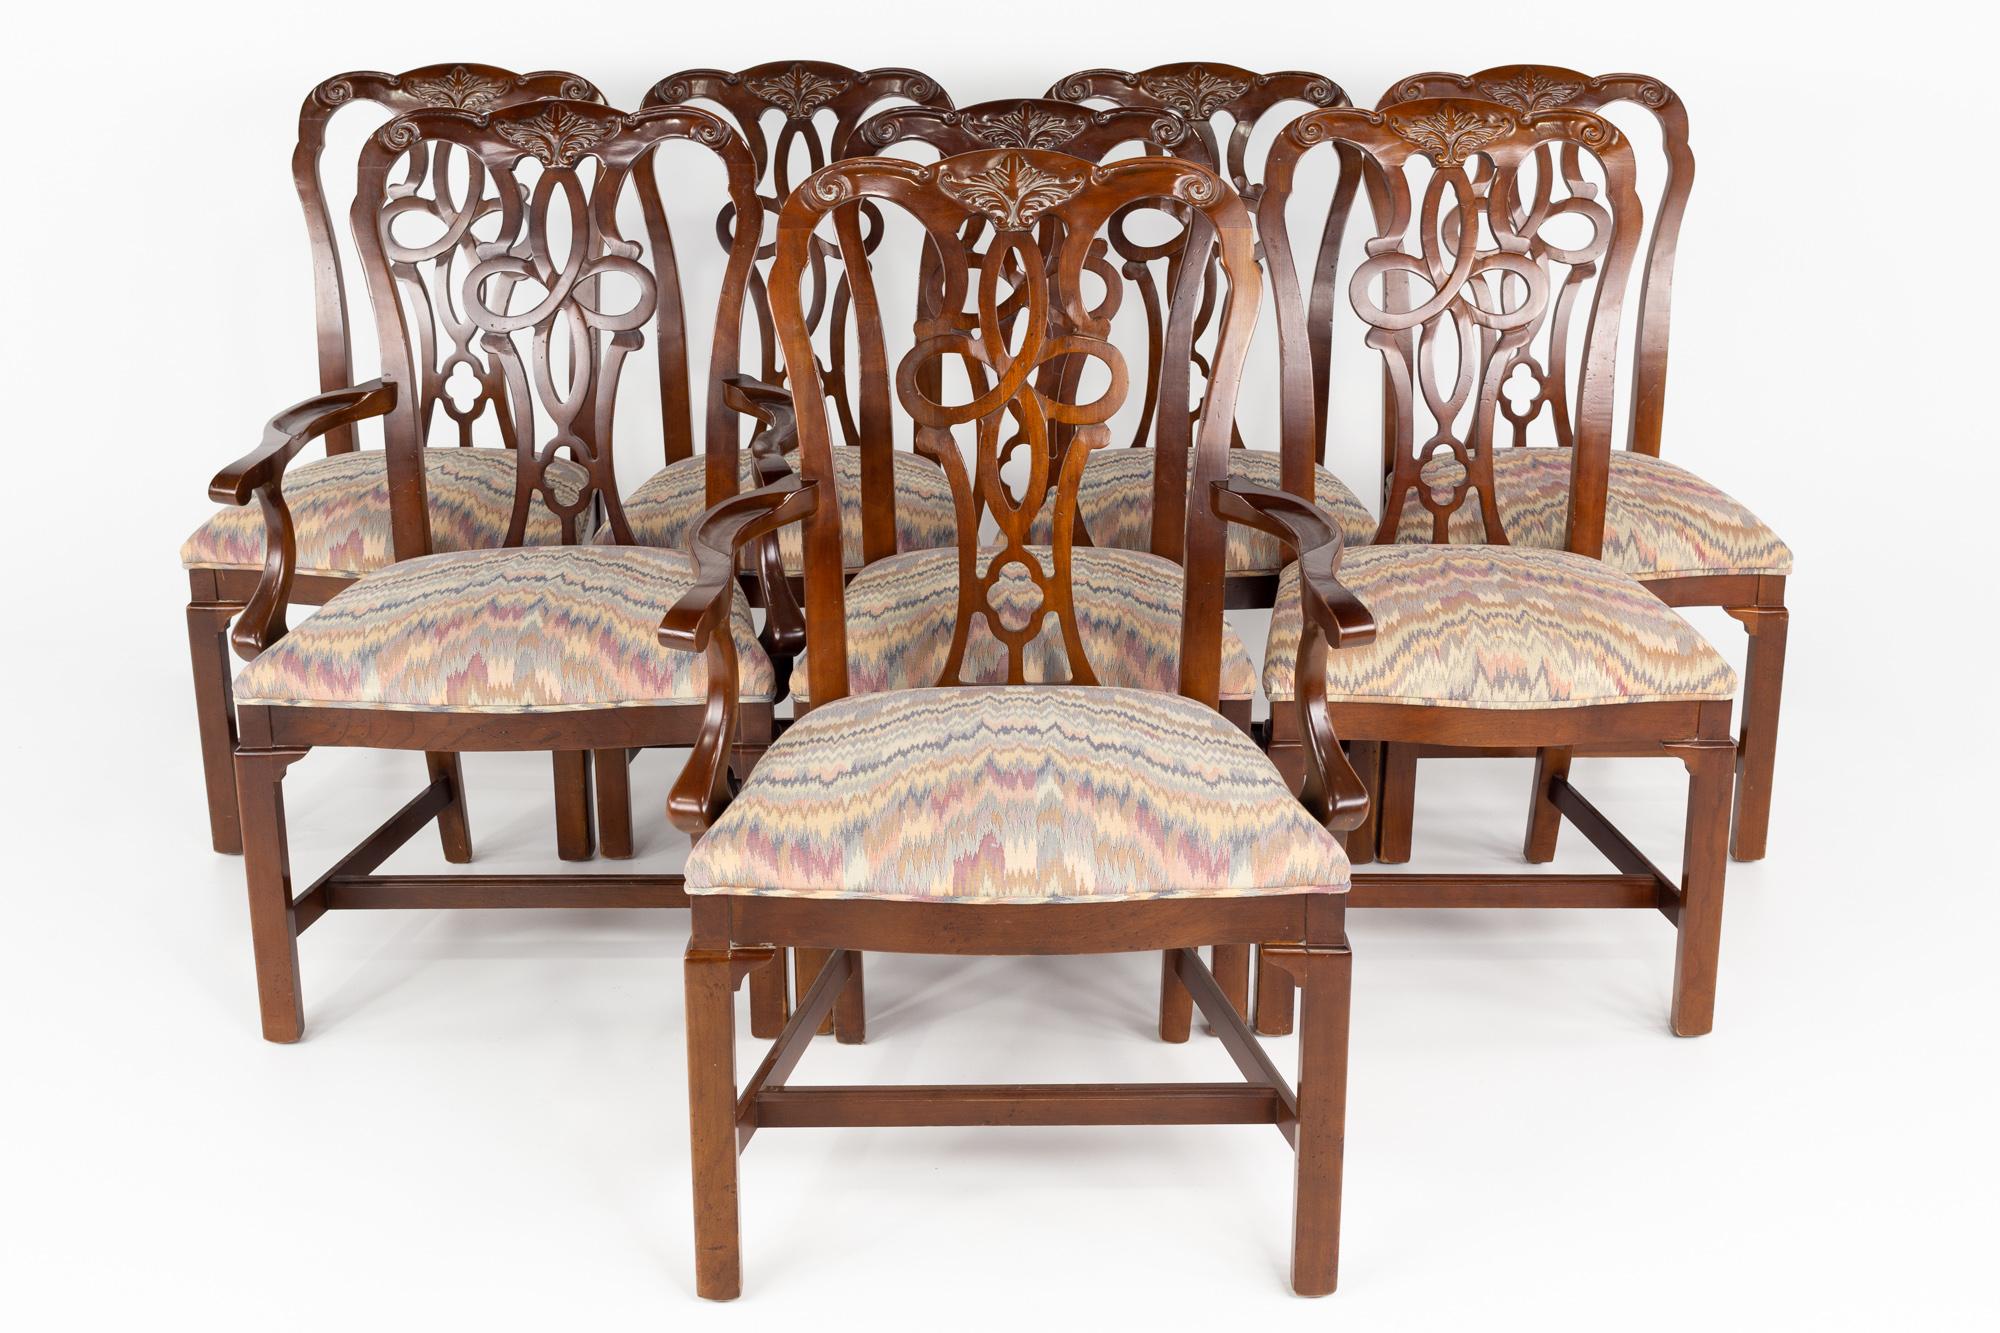 Century Furniture traditional dining chairs - Set of 8

Each chair measures: 25 wide x 23 deep x 39.5 high, with a seat height of 19.5 and arm height of 26 inches

This set is in great vintage condition with some small scrapes and scratches in the